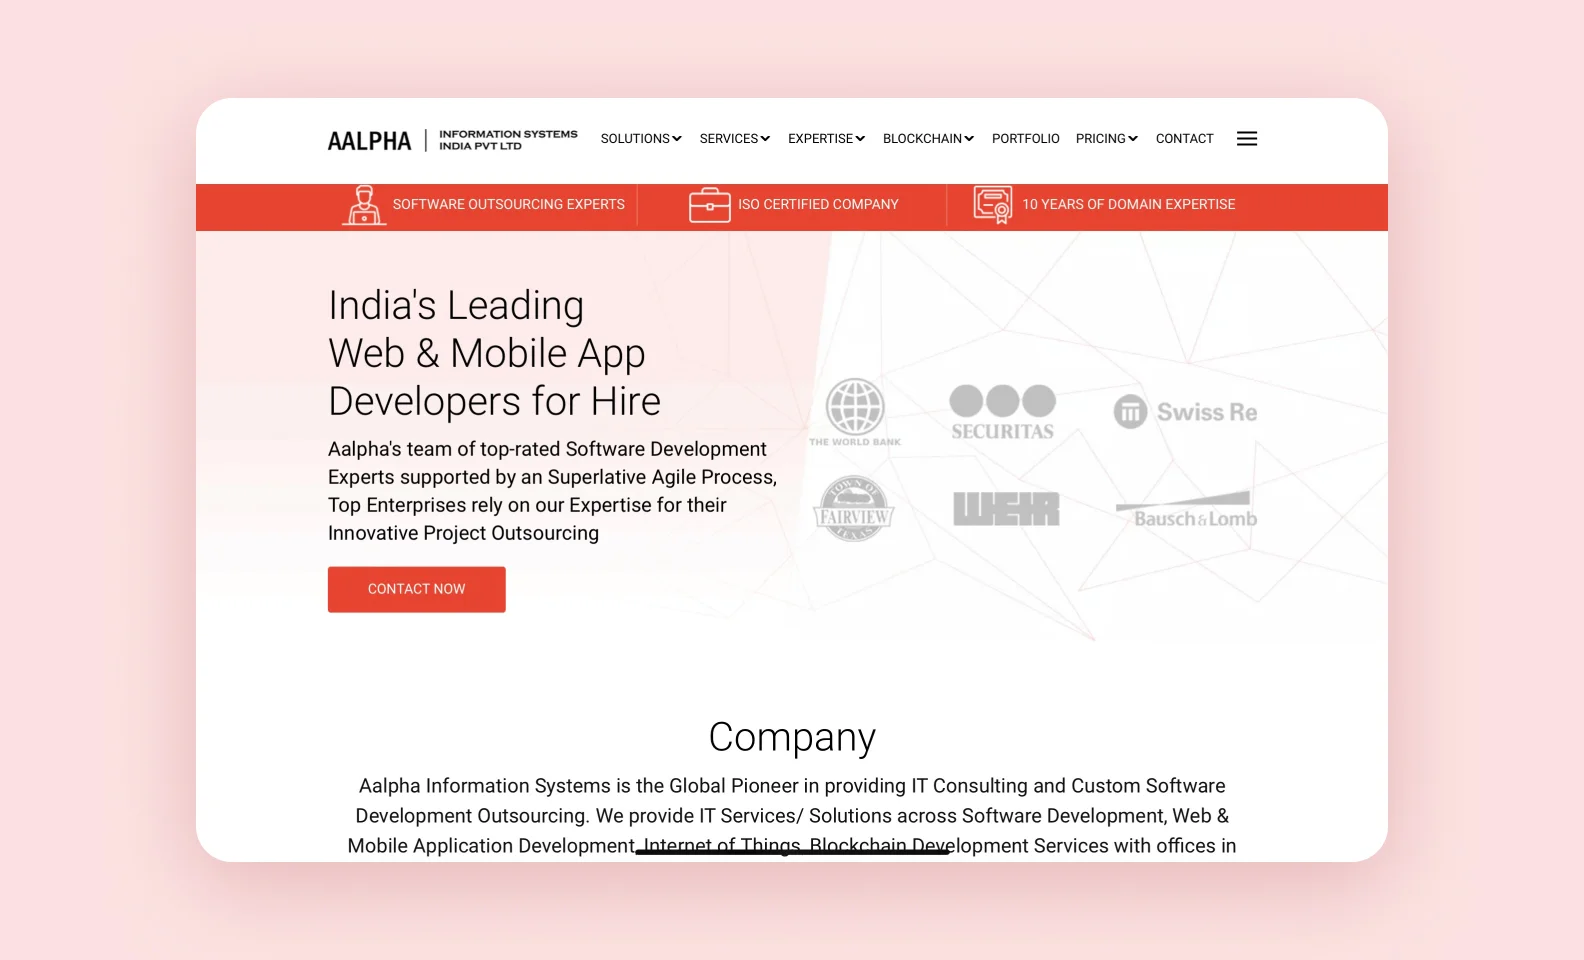 Aalpha software outsourcing company